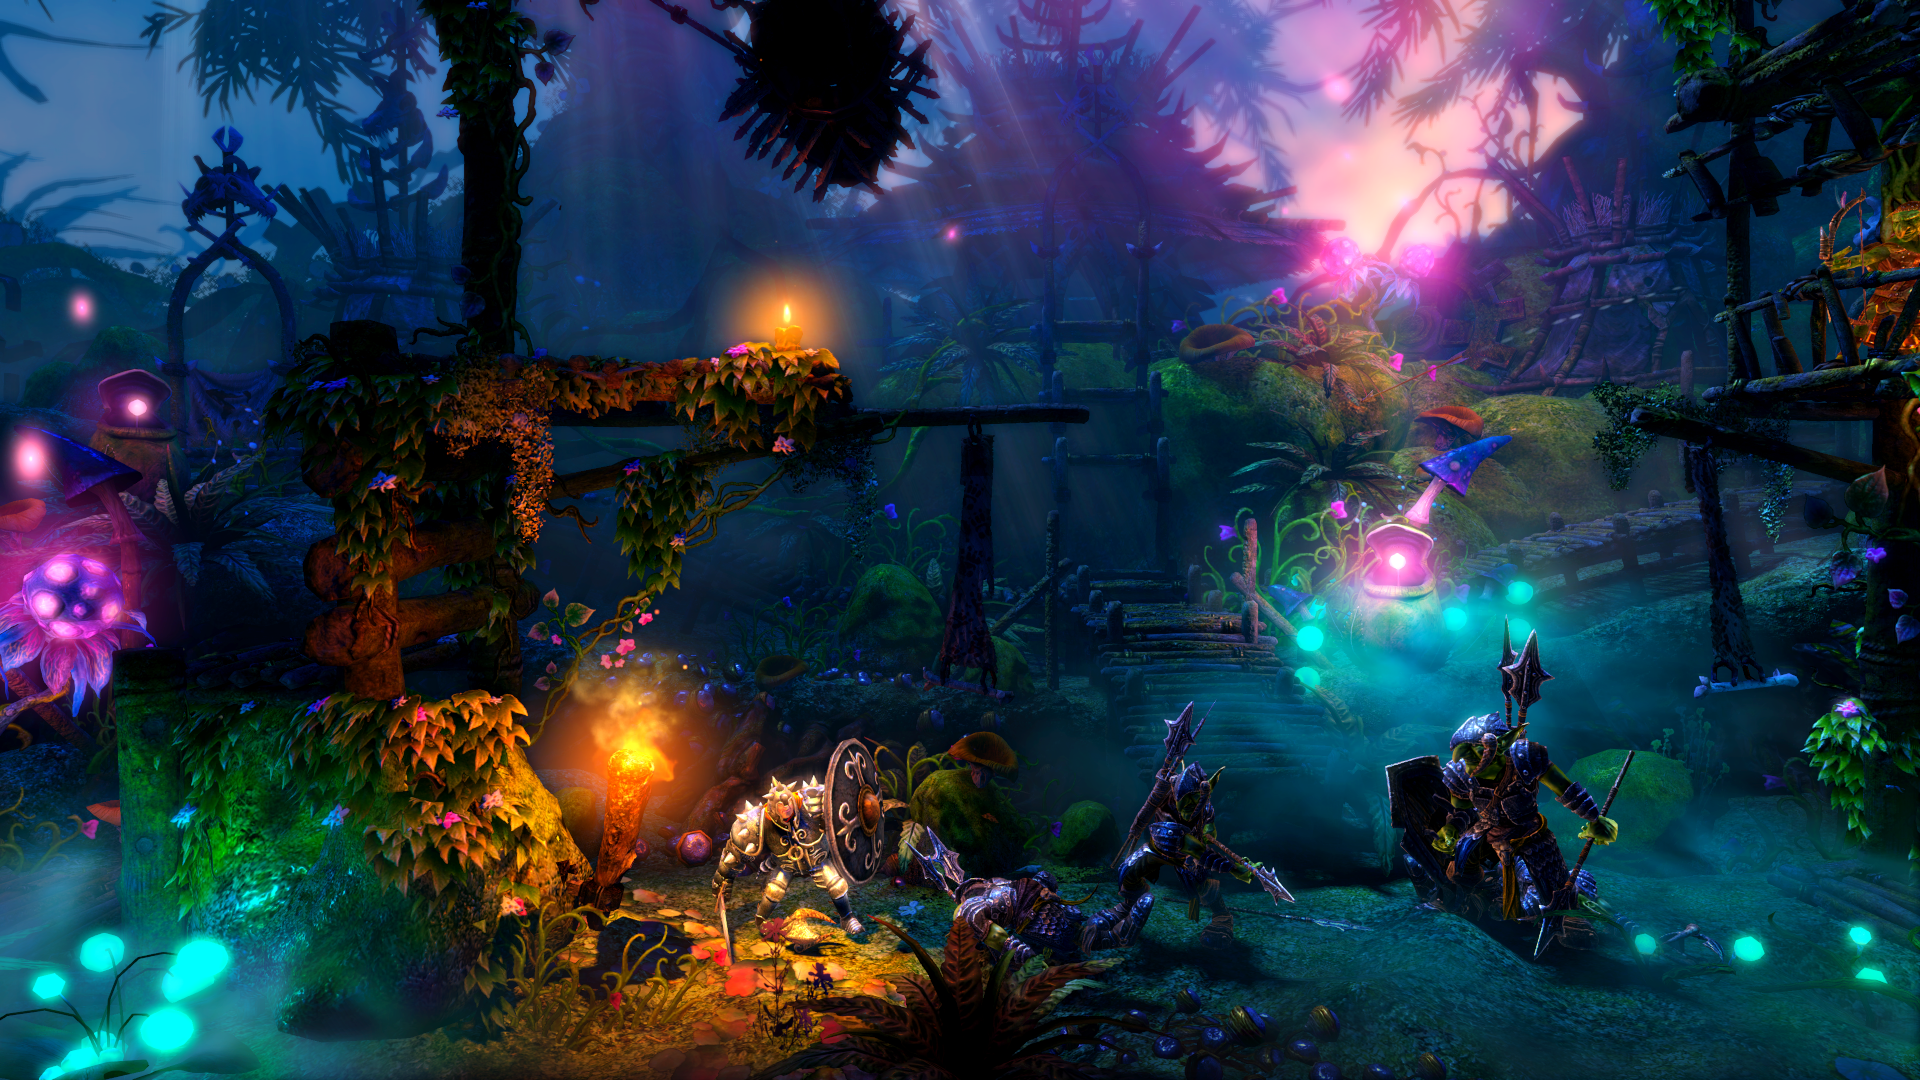 trine 2 complete story download